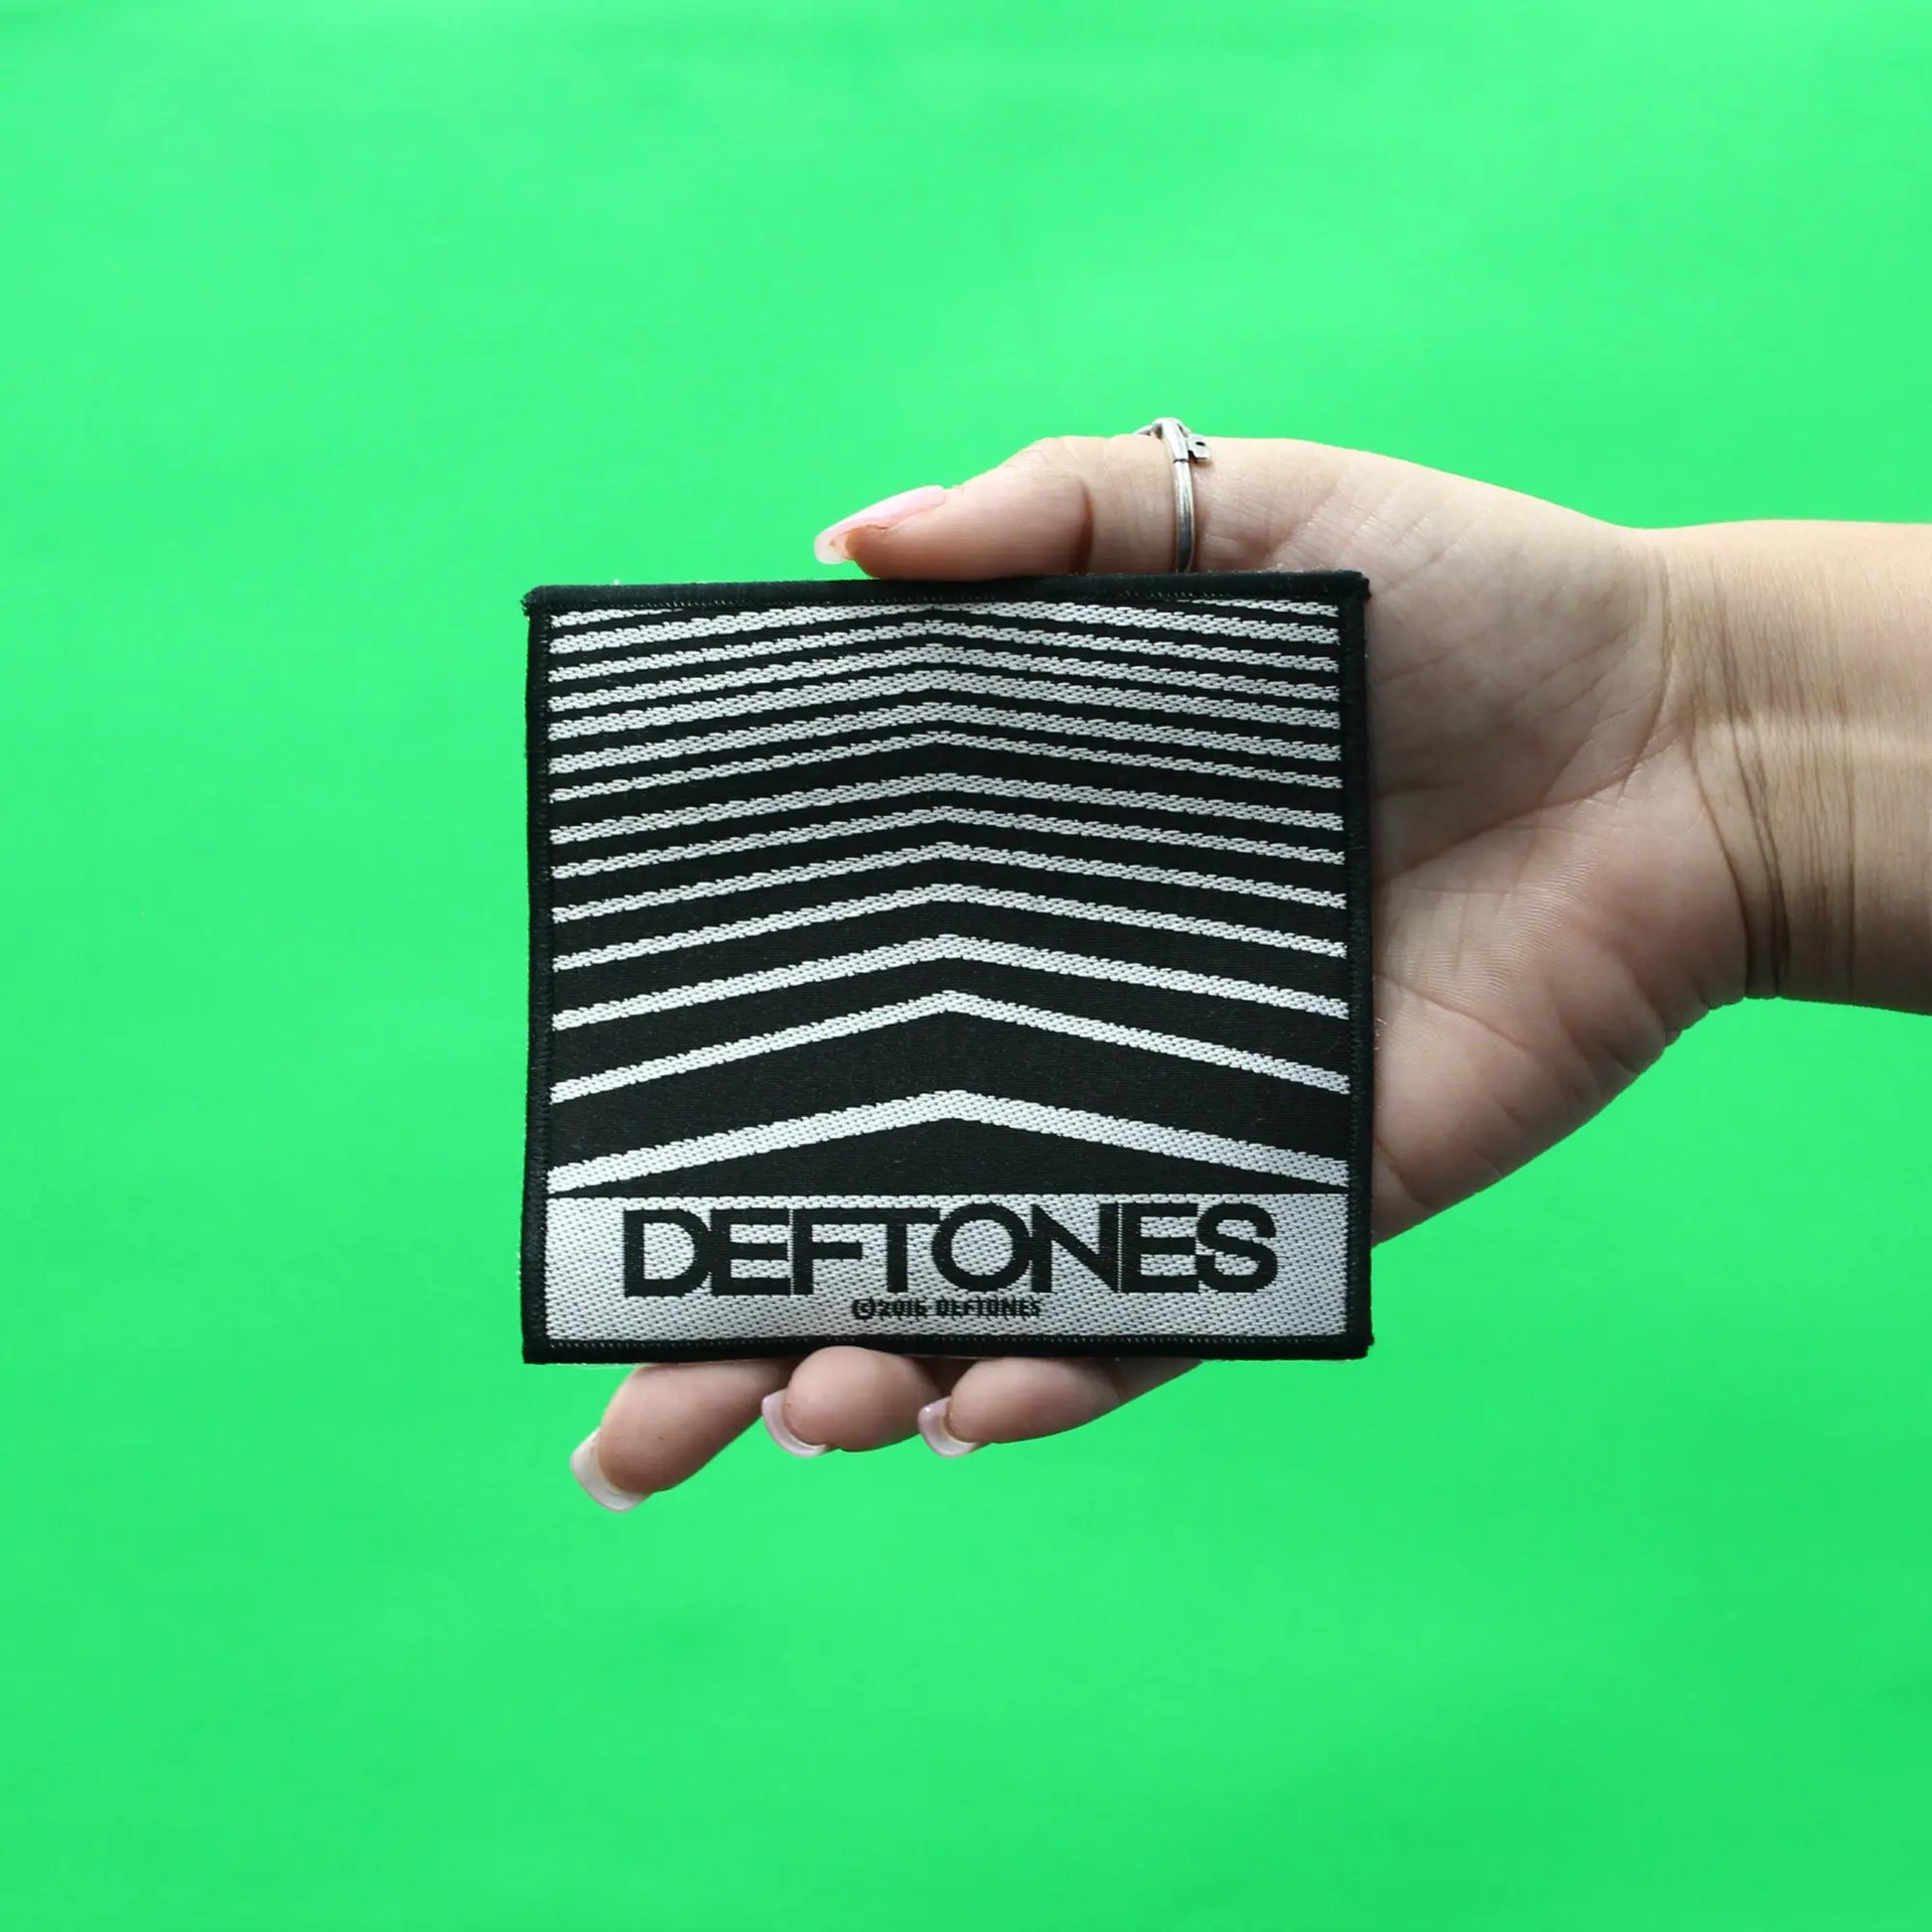 Deftones Abstract Lines Patch California Alternative Rock Woven Iron On